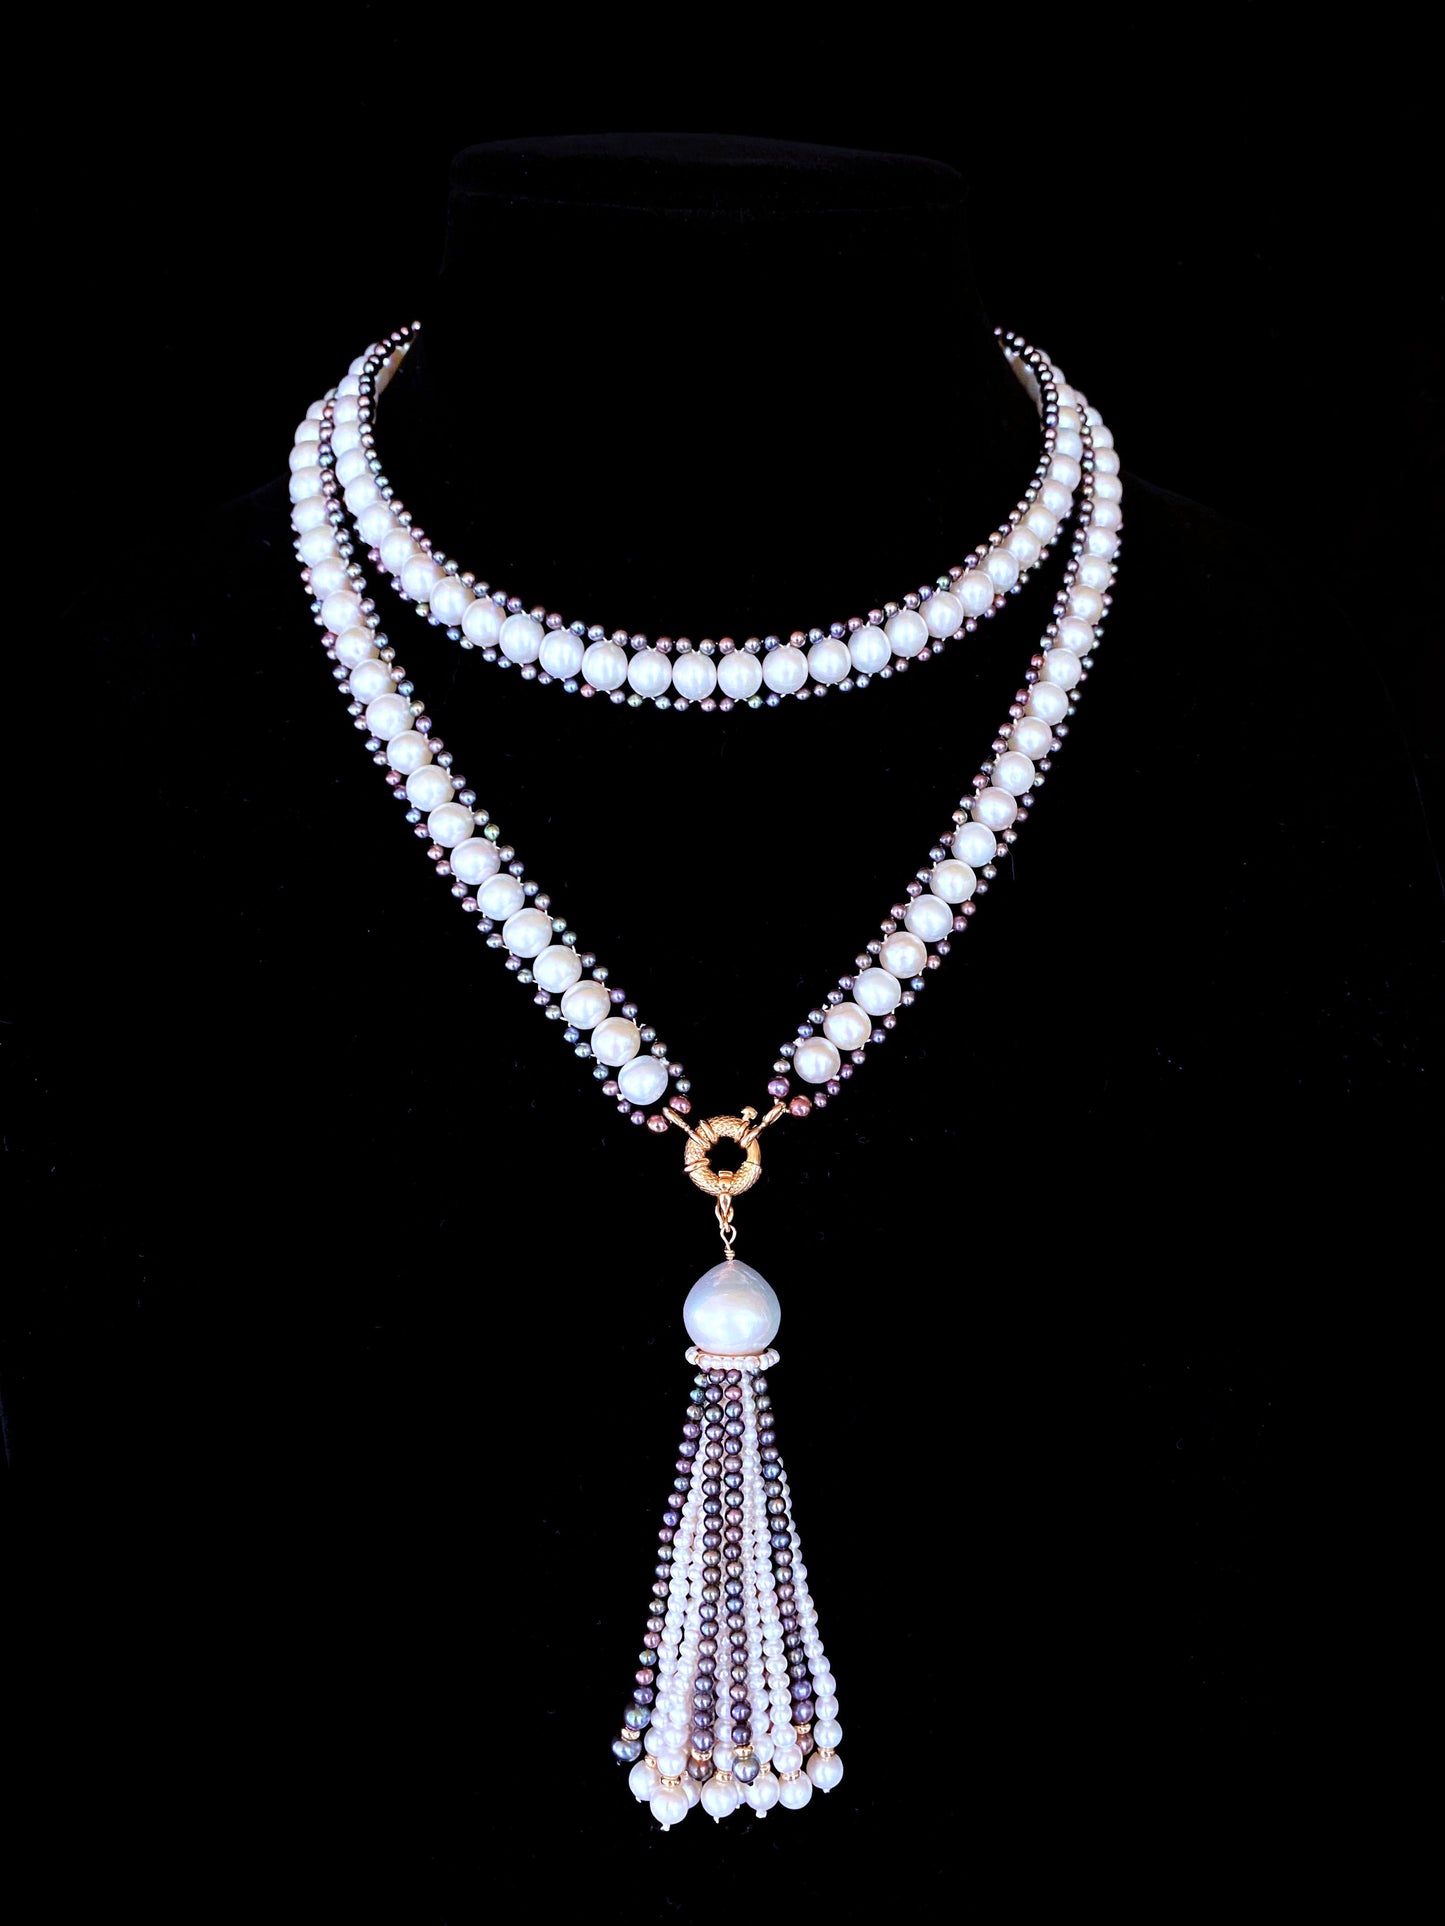 Black & White Pearl Sautoir with Removable Tassel & 14k Yellow Gold